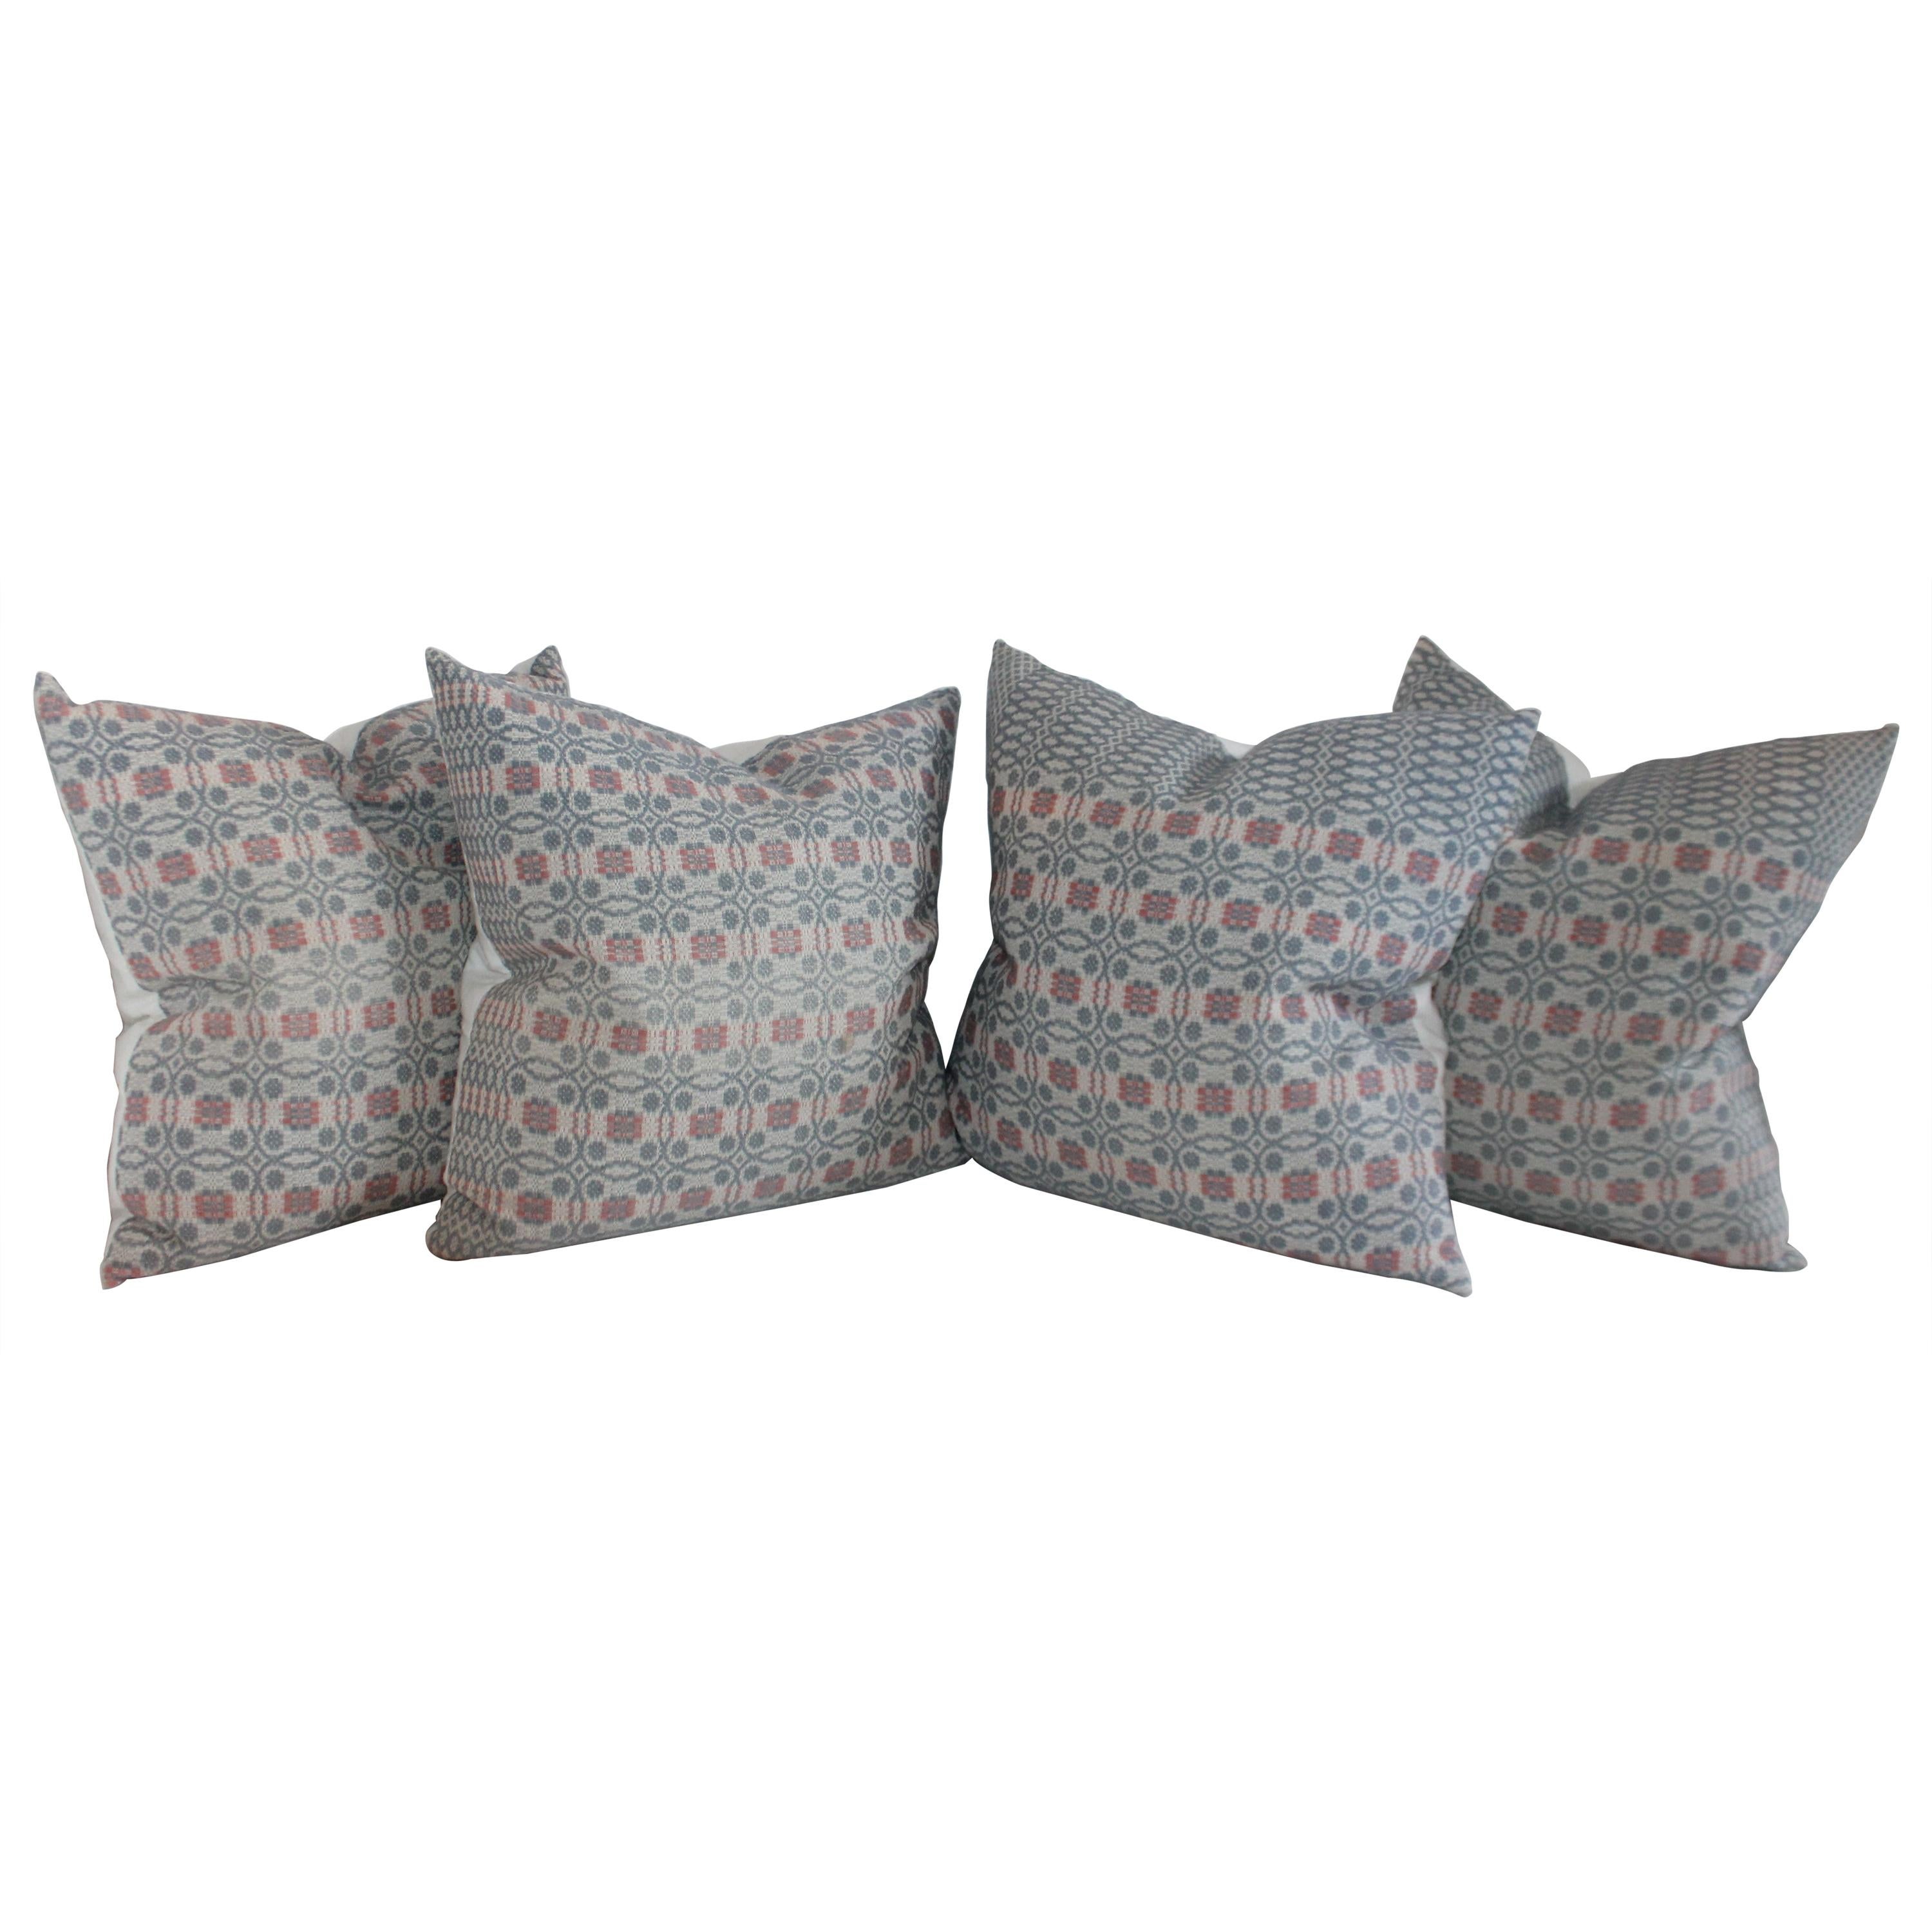 Collection of Woven Coverlet Pillows